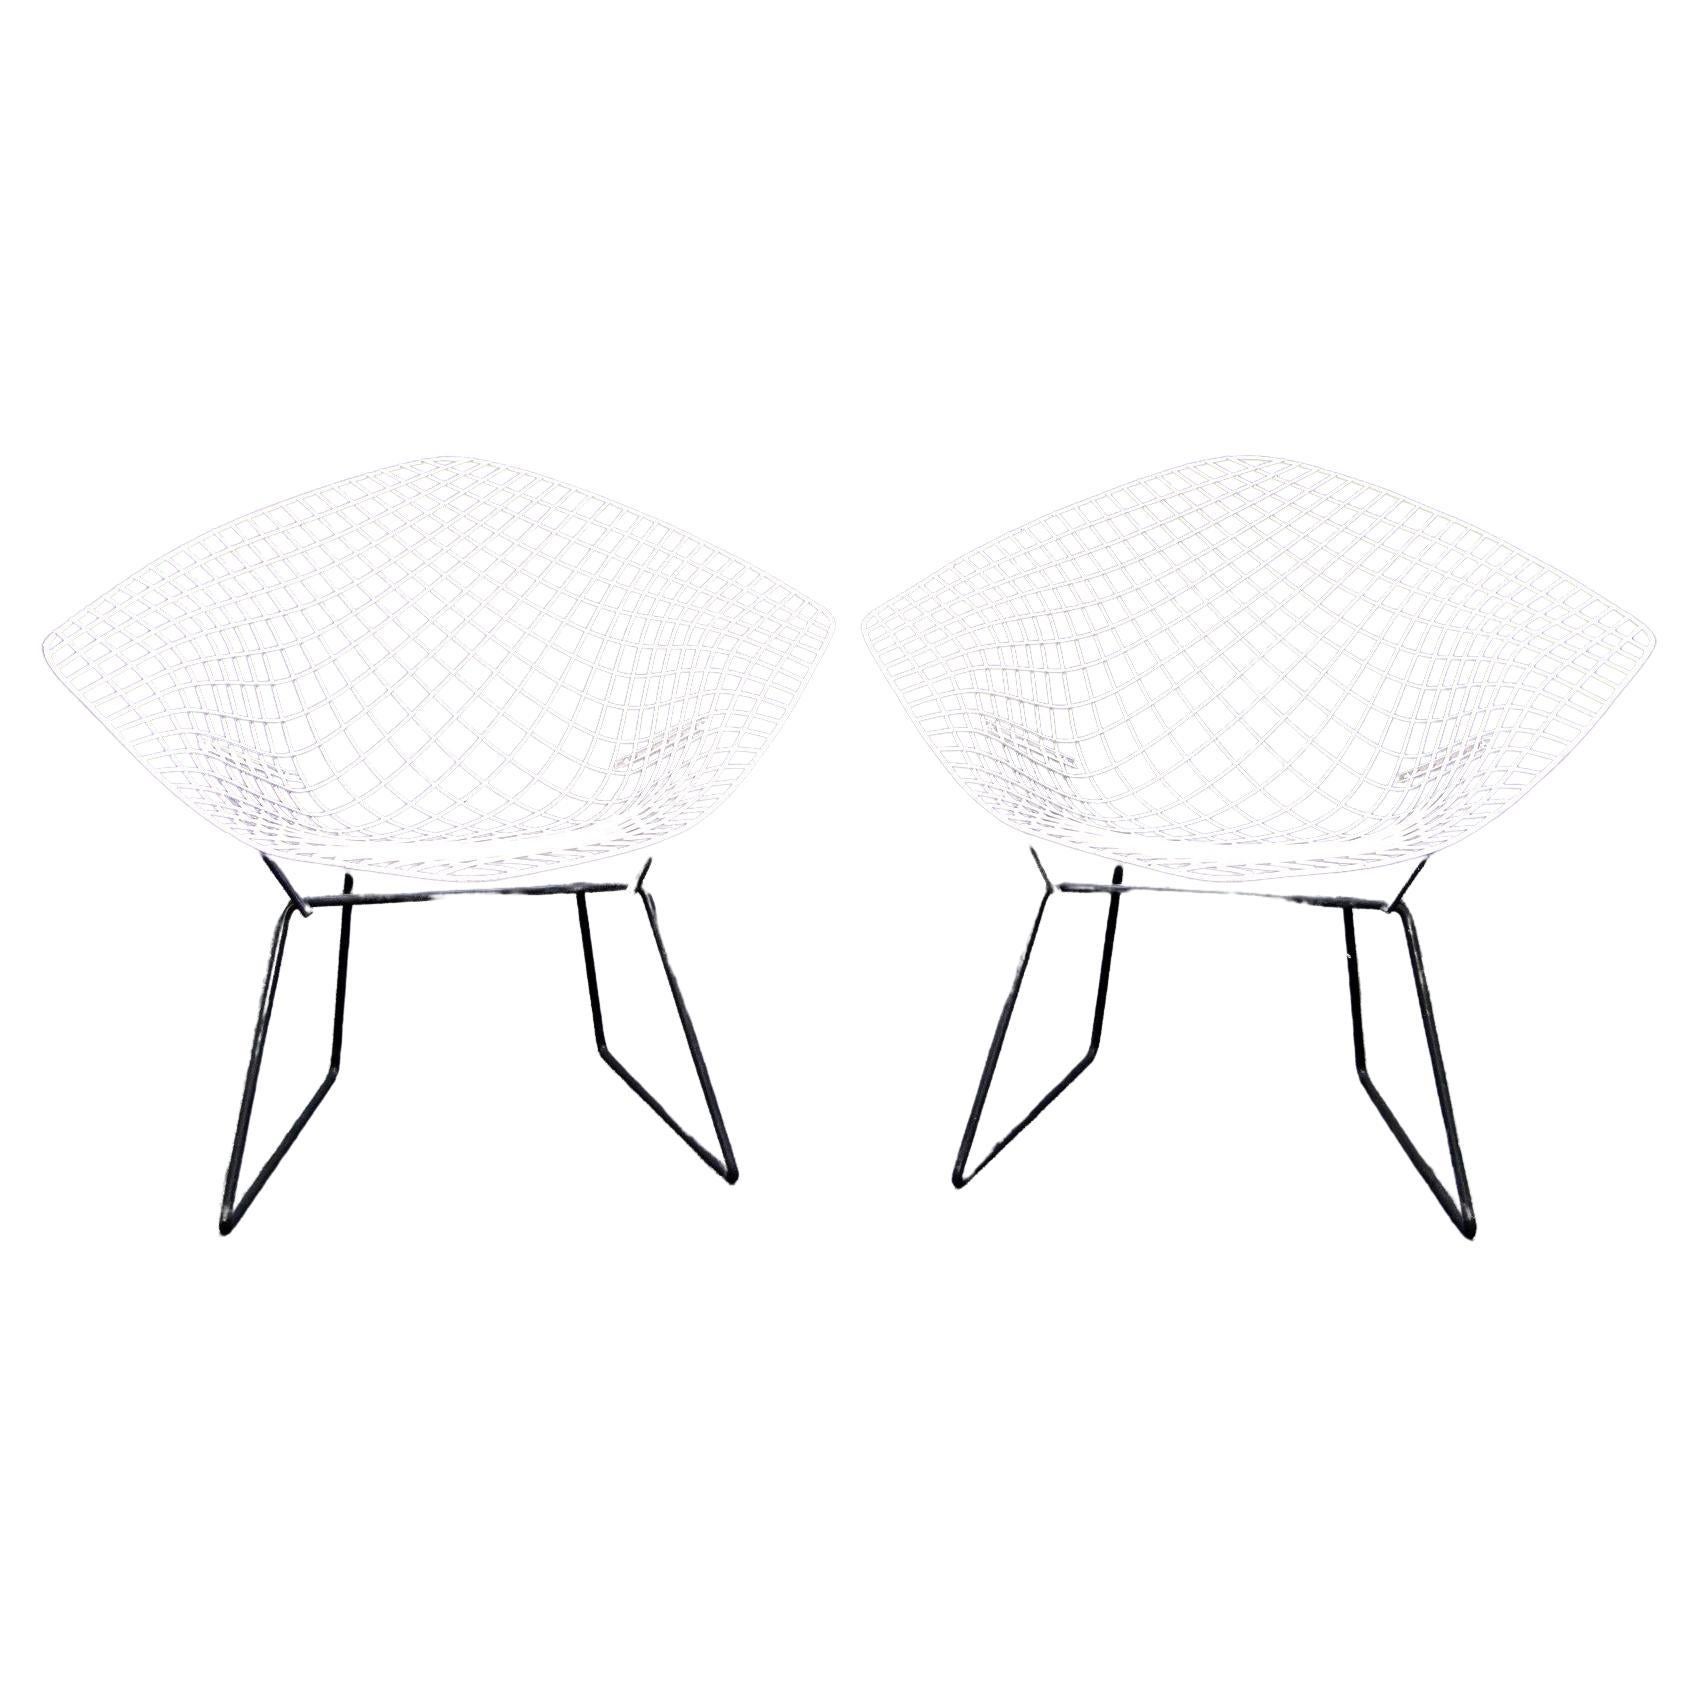 Two 1960s "421" Diamond Chairs By Harry Bertoia For Knoll International